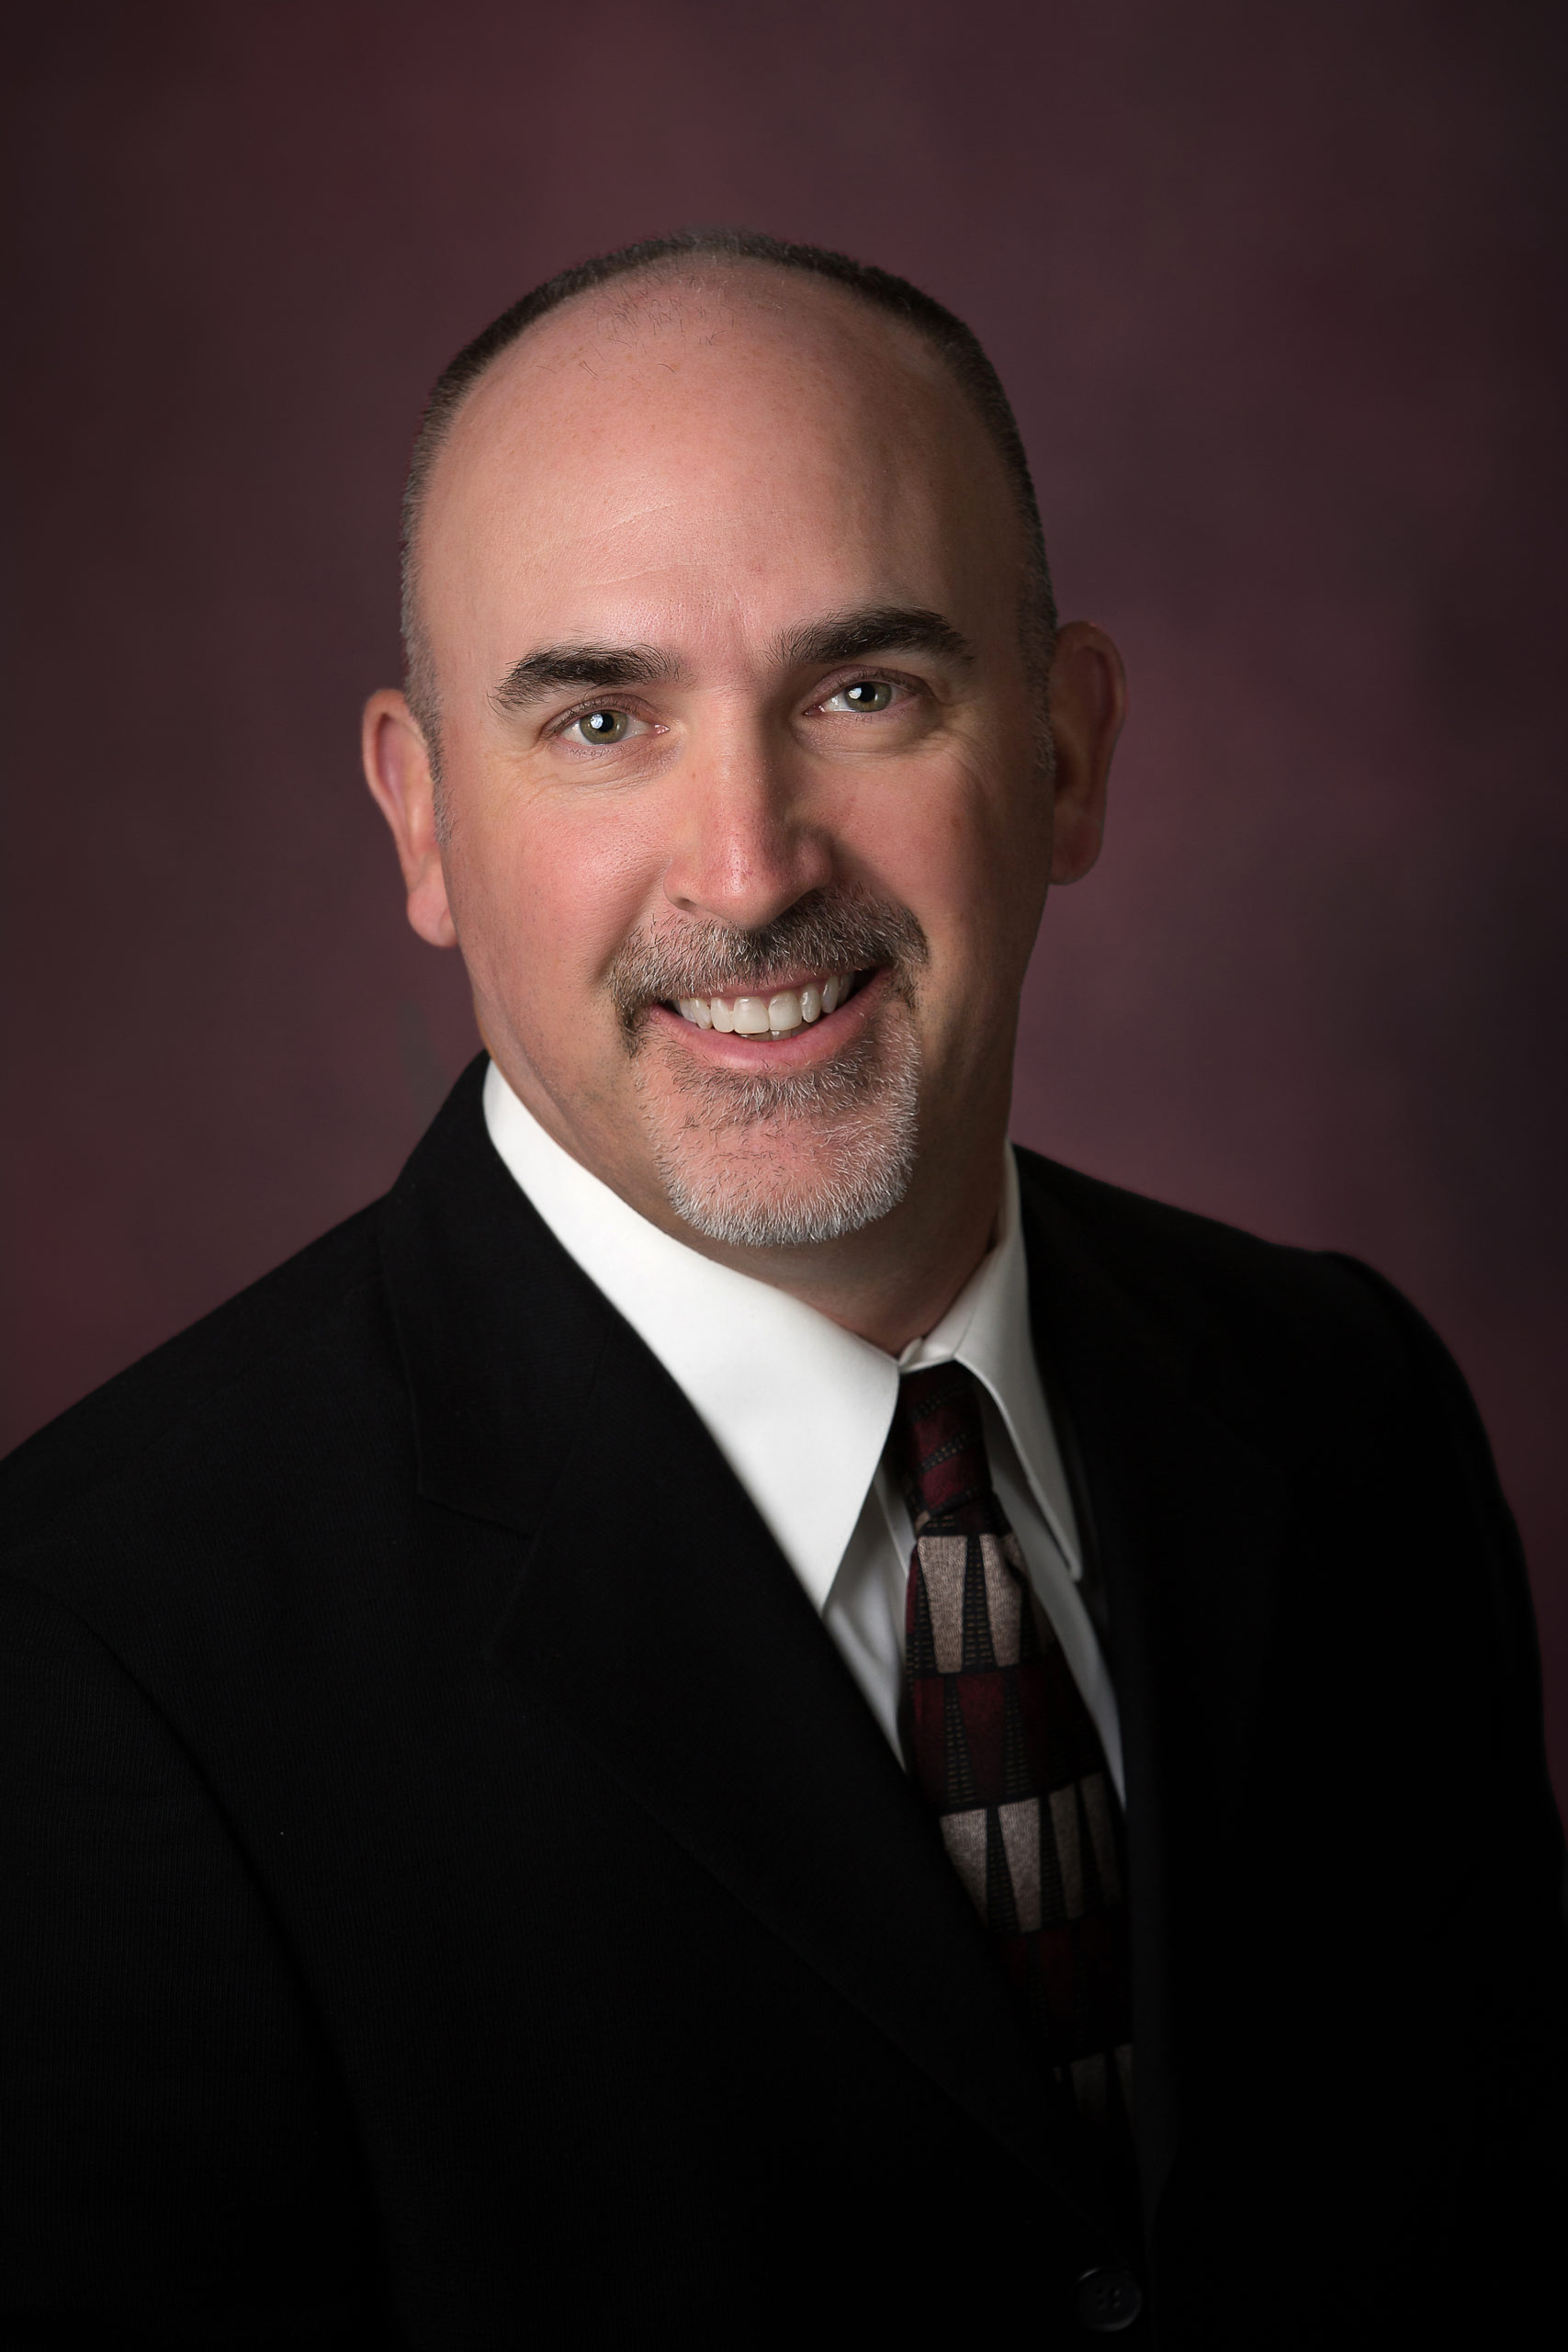 Headshot for Dr. Jeffery Berney from Family Medical specialities medical clinic in holdrege